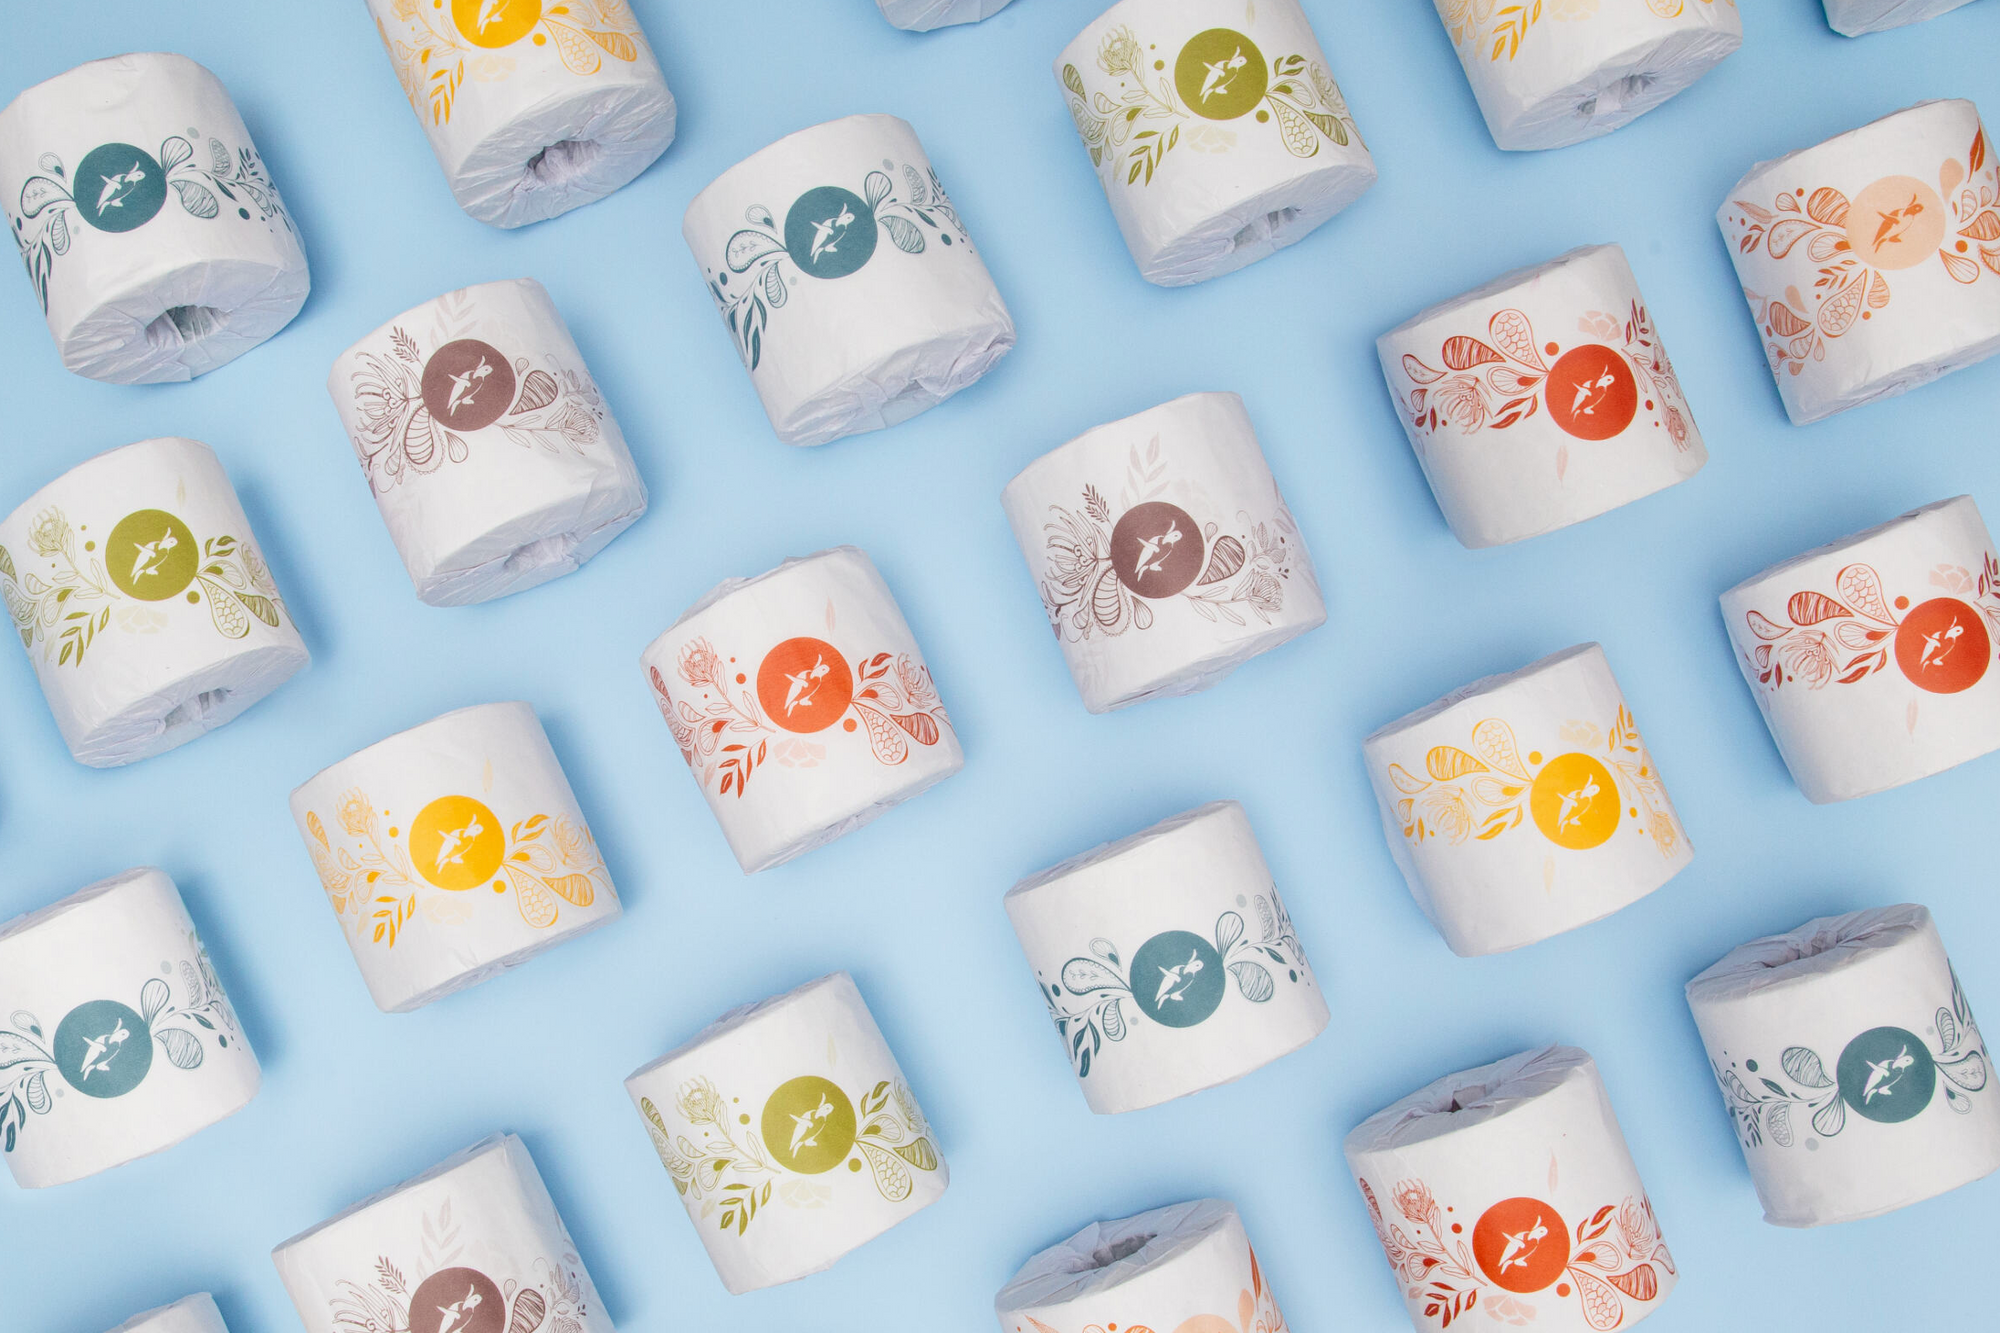 individually wrapped toilet paper rolls by pure planet club